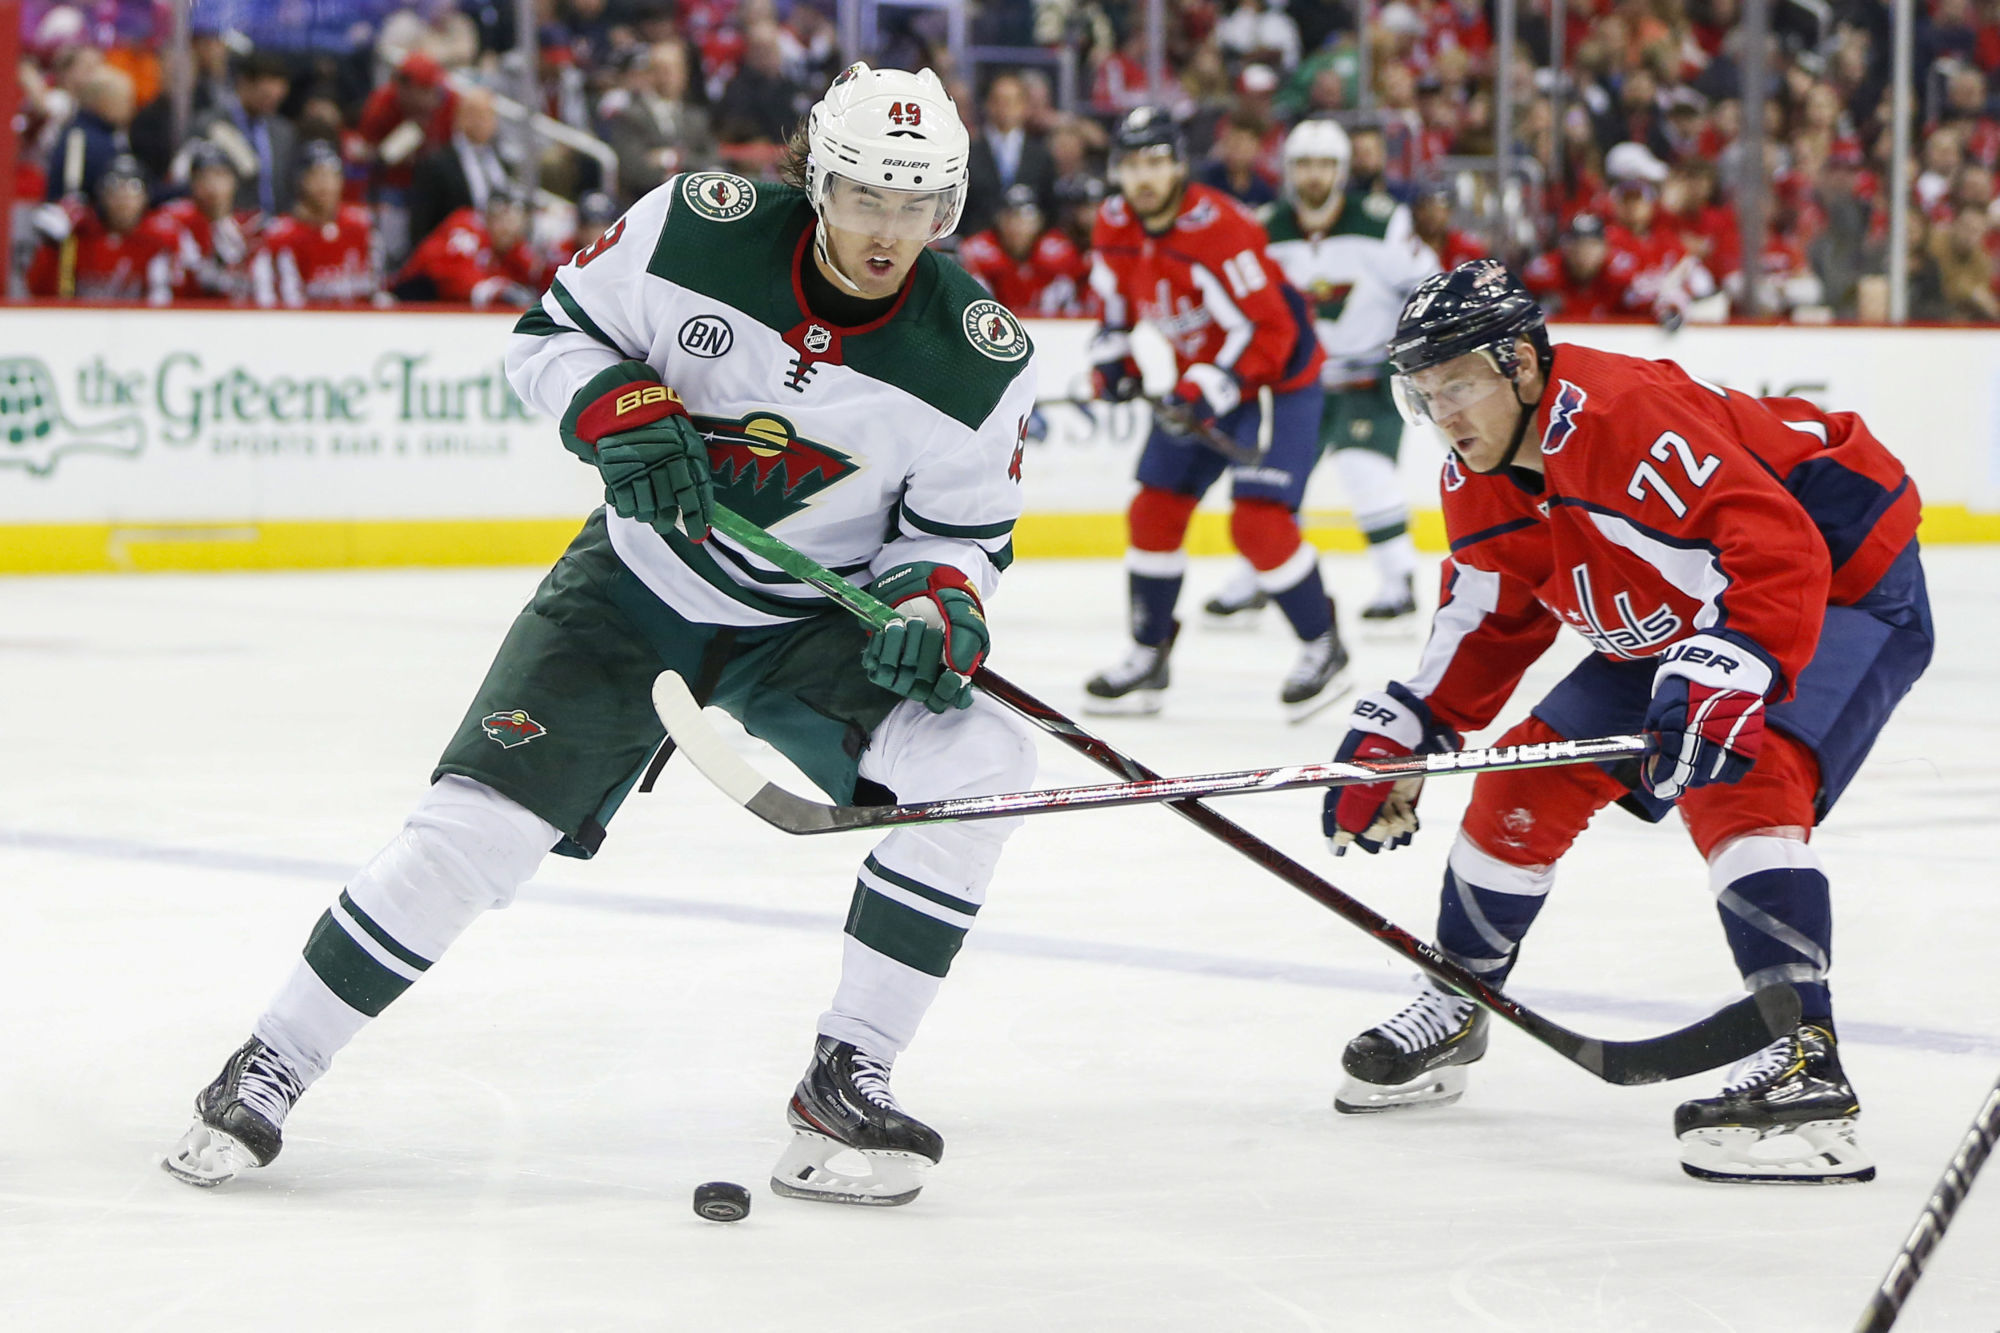 Mar 22, 2019; Washington, DC, USA; Minnesota Wild center Victor Rask (49) battles for the puck with Washington Capitals center Travis Boyd (72) during the second period at Capital One Arena. Photo : SUSA / Icon Sport